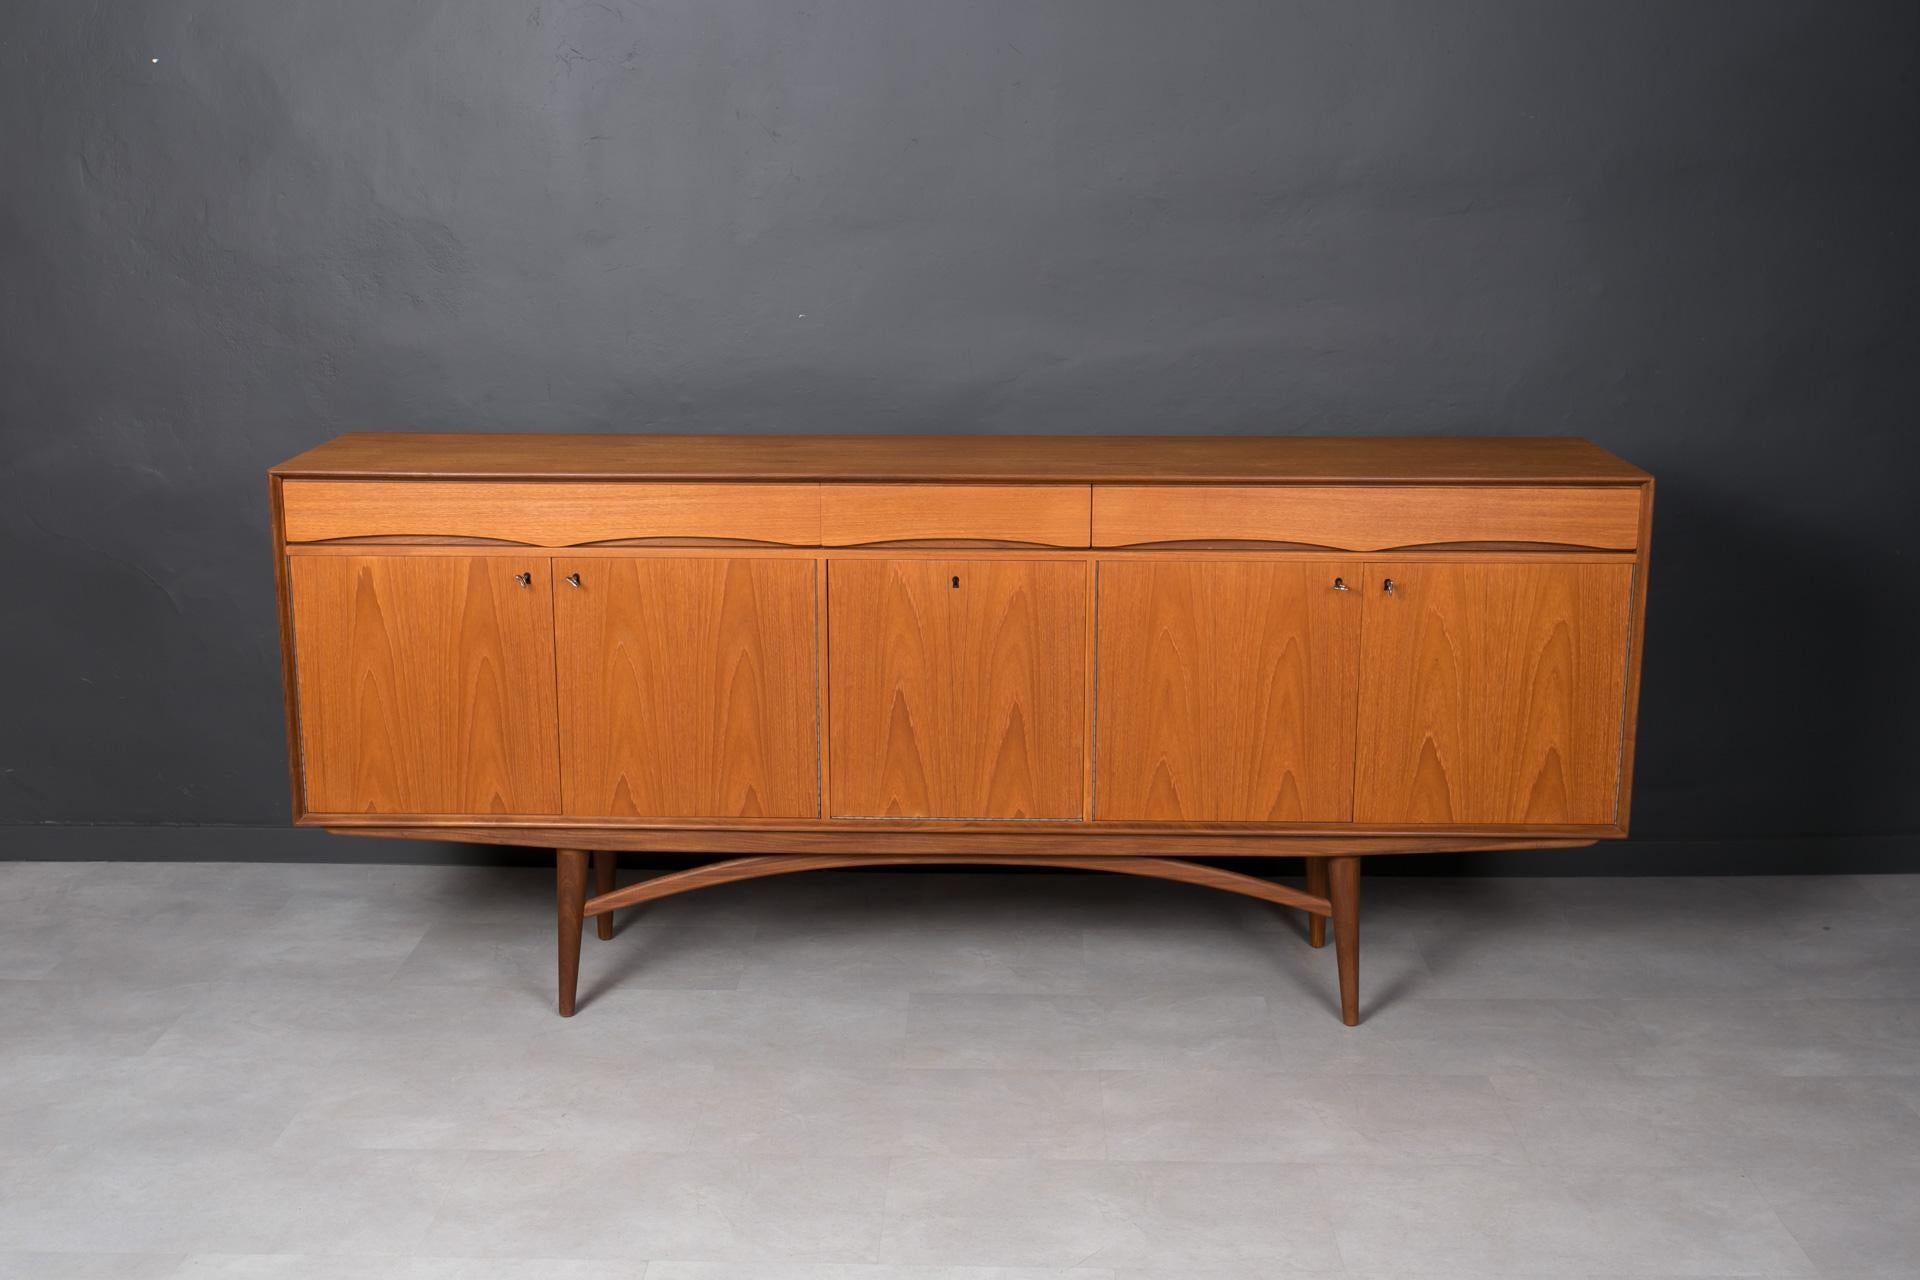 This teak sideboard comes from Norway and was made around 1960s. It is most probably one of Gustav Bahus designs. It has original stamp on the back that looks like Gustav Bahus stamp but it is not fully clear. It features three storage sections,